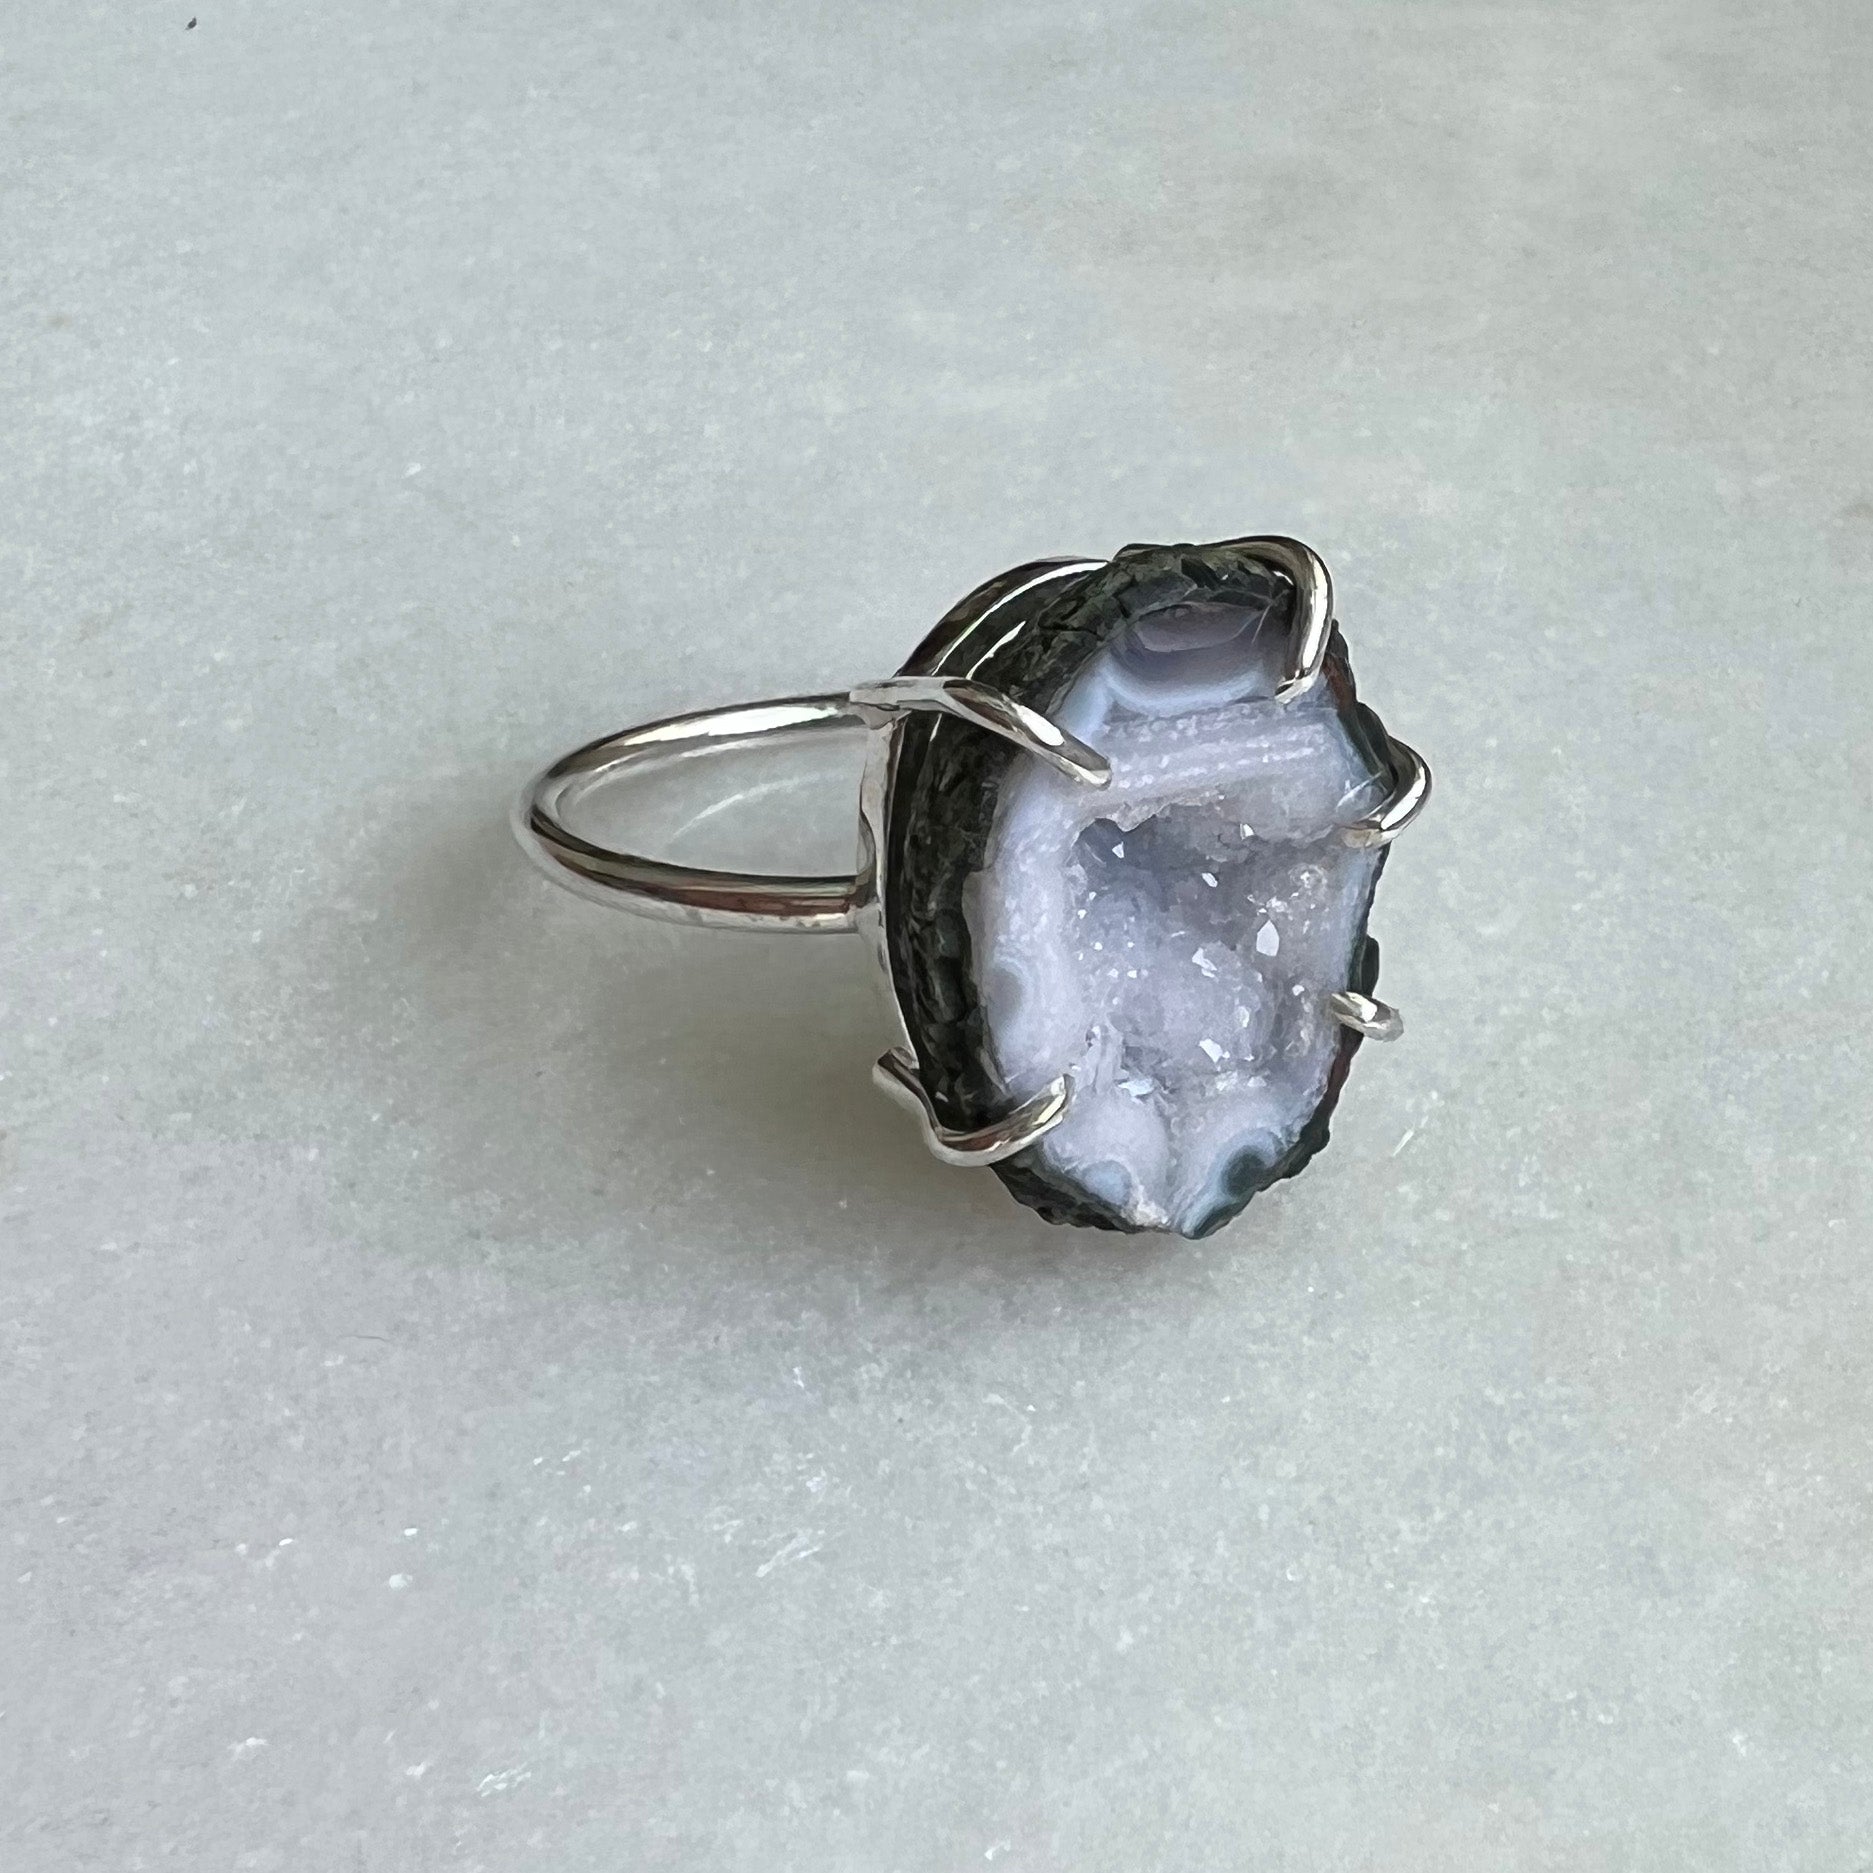 Geode Ring // size 8.5